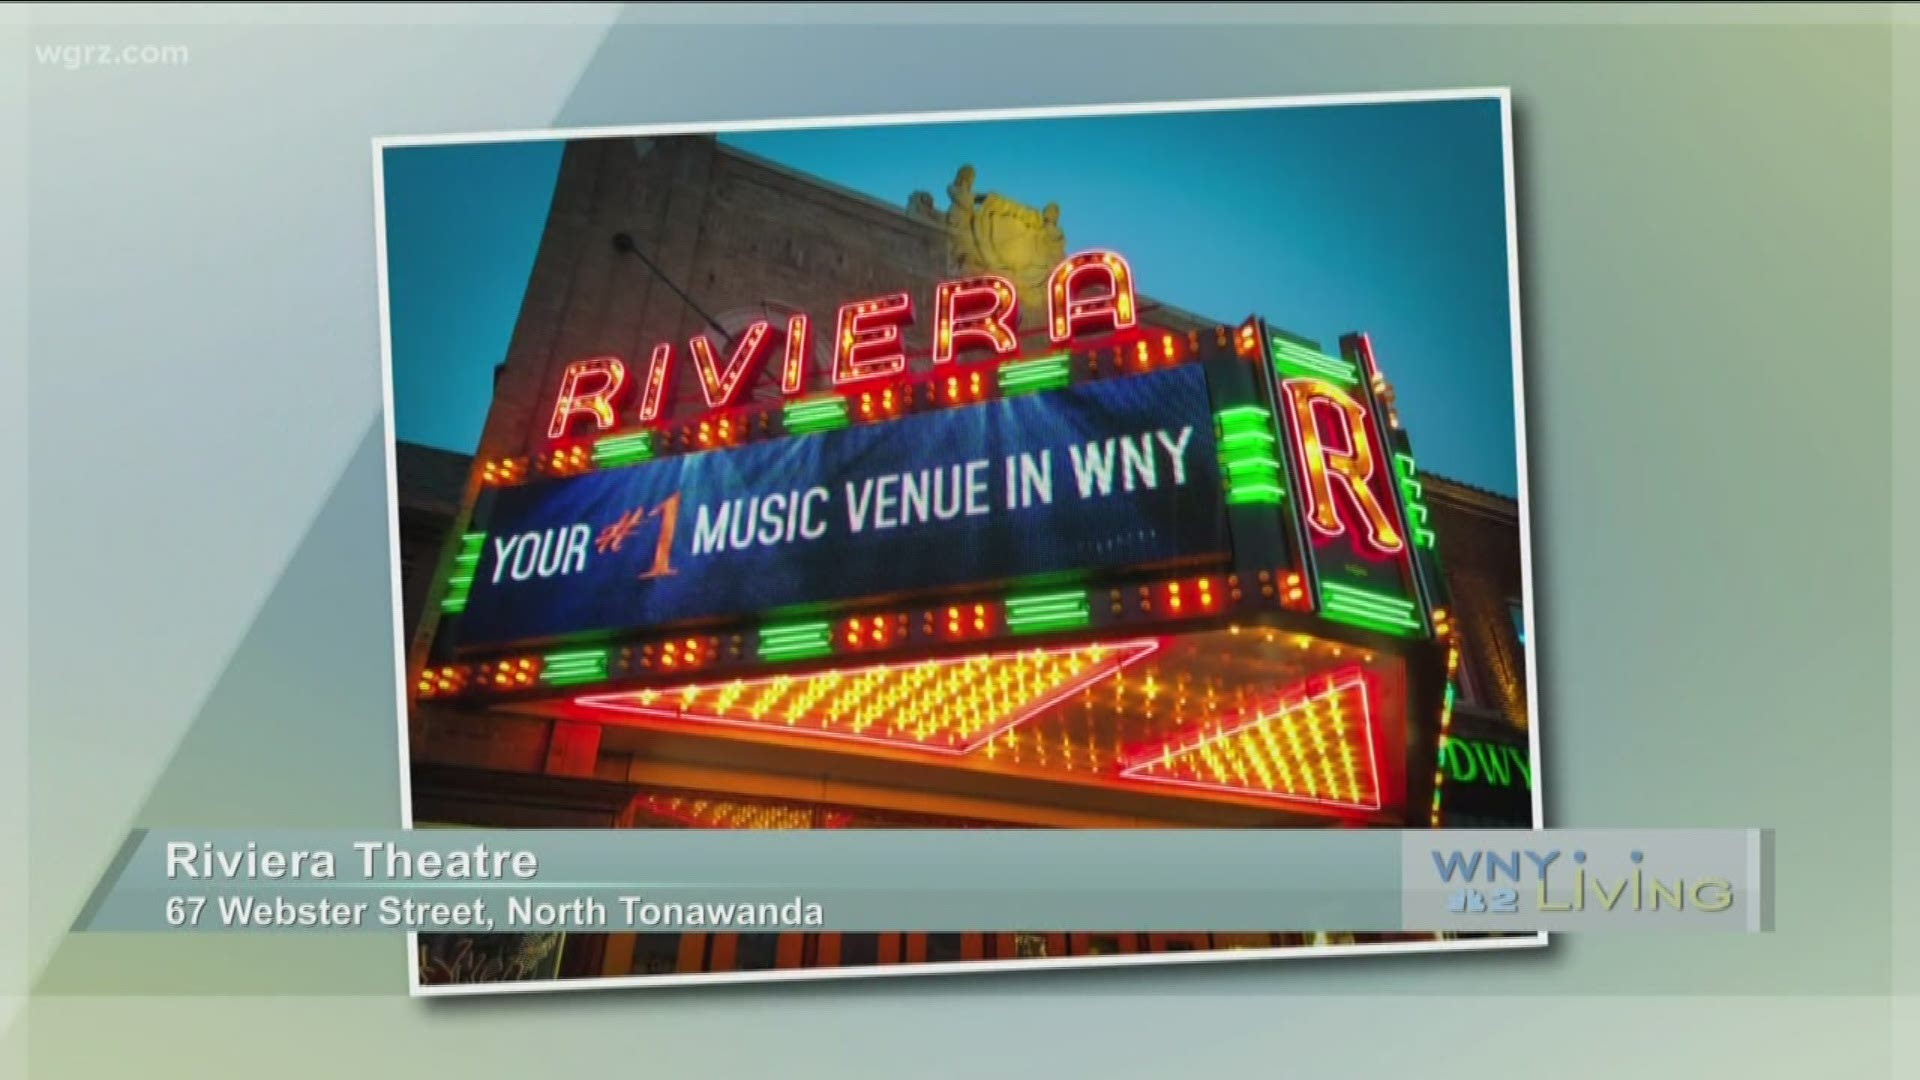 February 22 - WECK Riviera Theatre (THIS VIDEO IS SPONSORED BY WECK RIVIERA THEATRE)